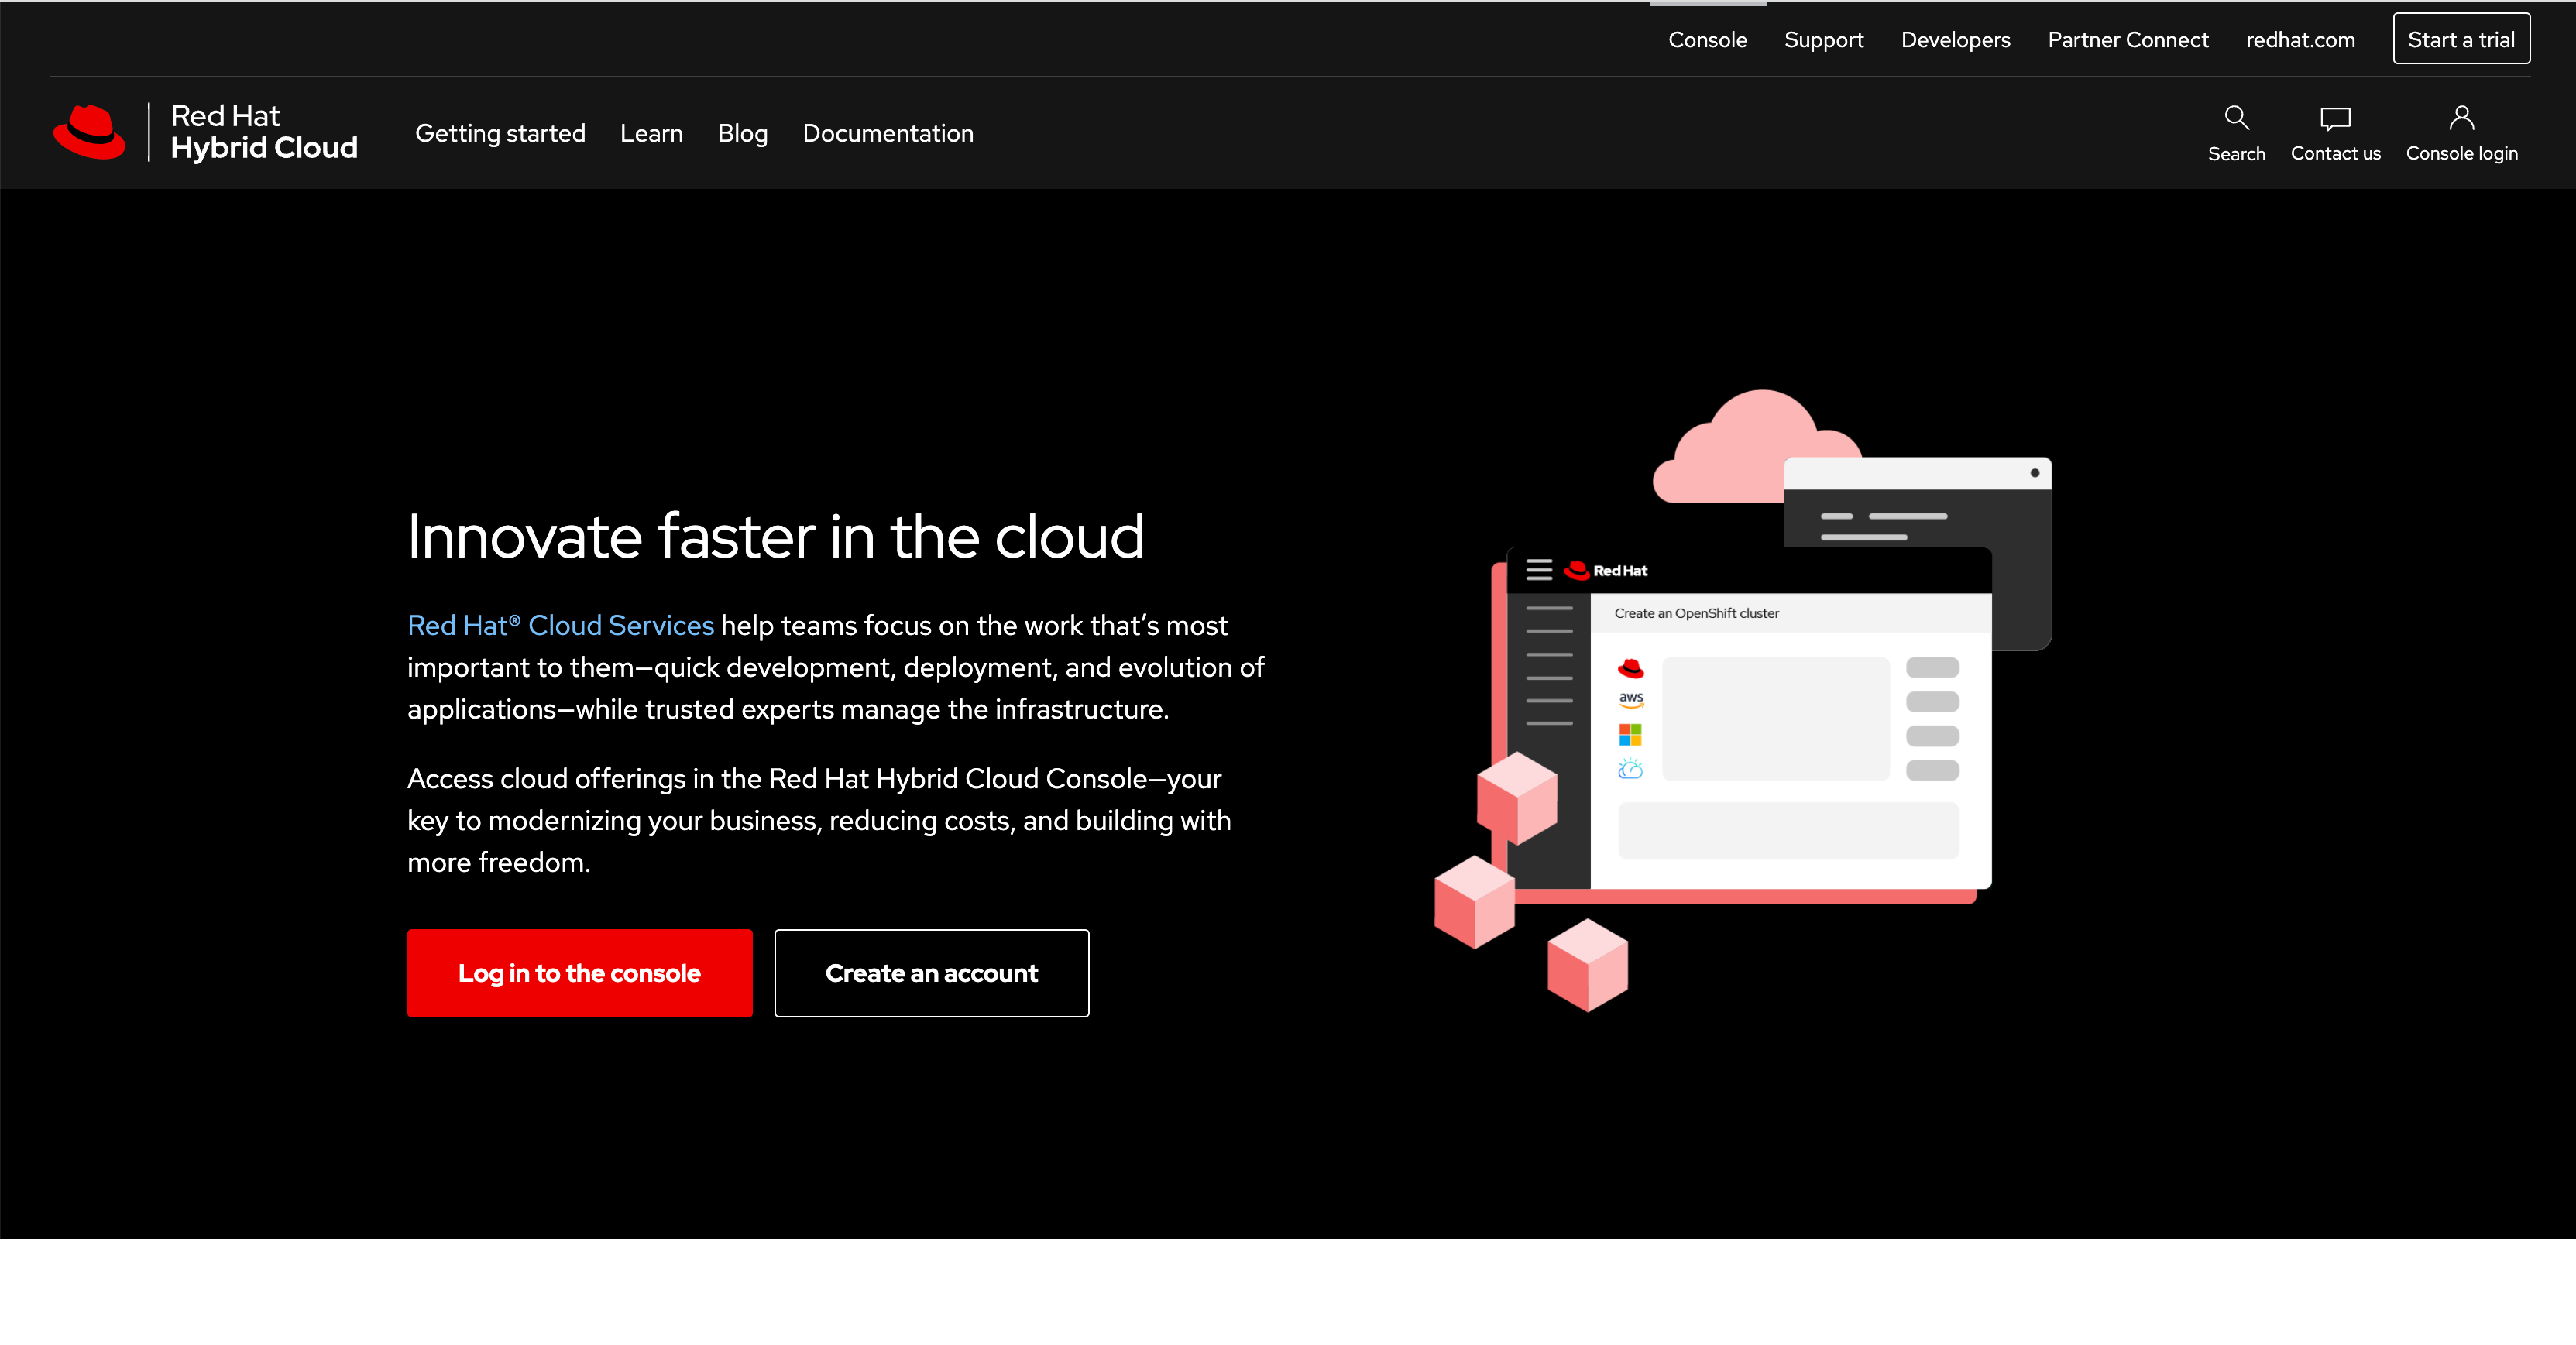 Red Hat Hybrid Cloud home